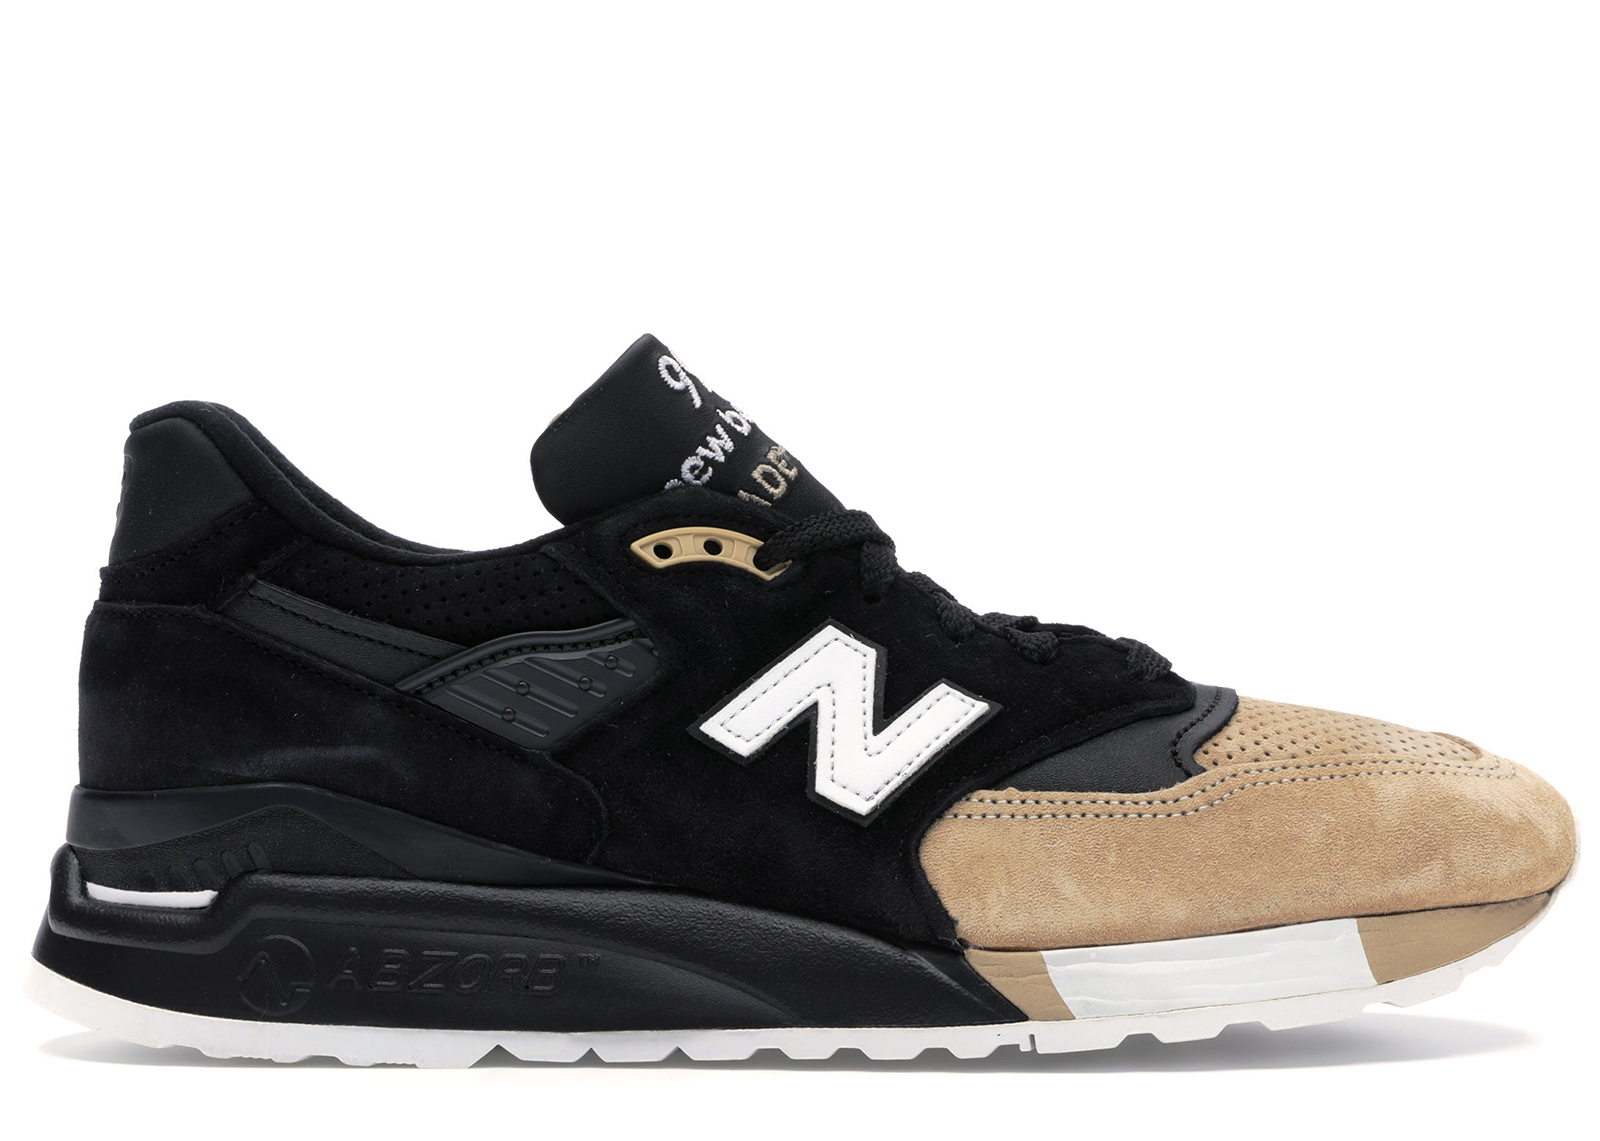 Buy New Balance 998 Shoes & New Sneakers - StockX